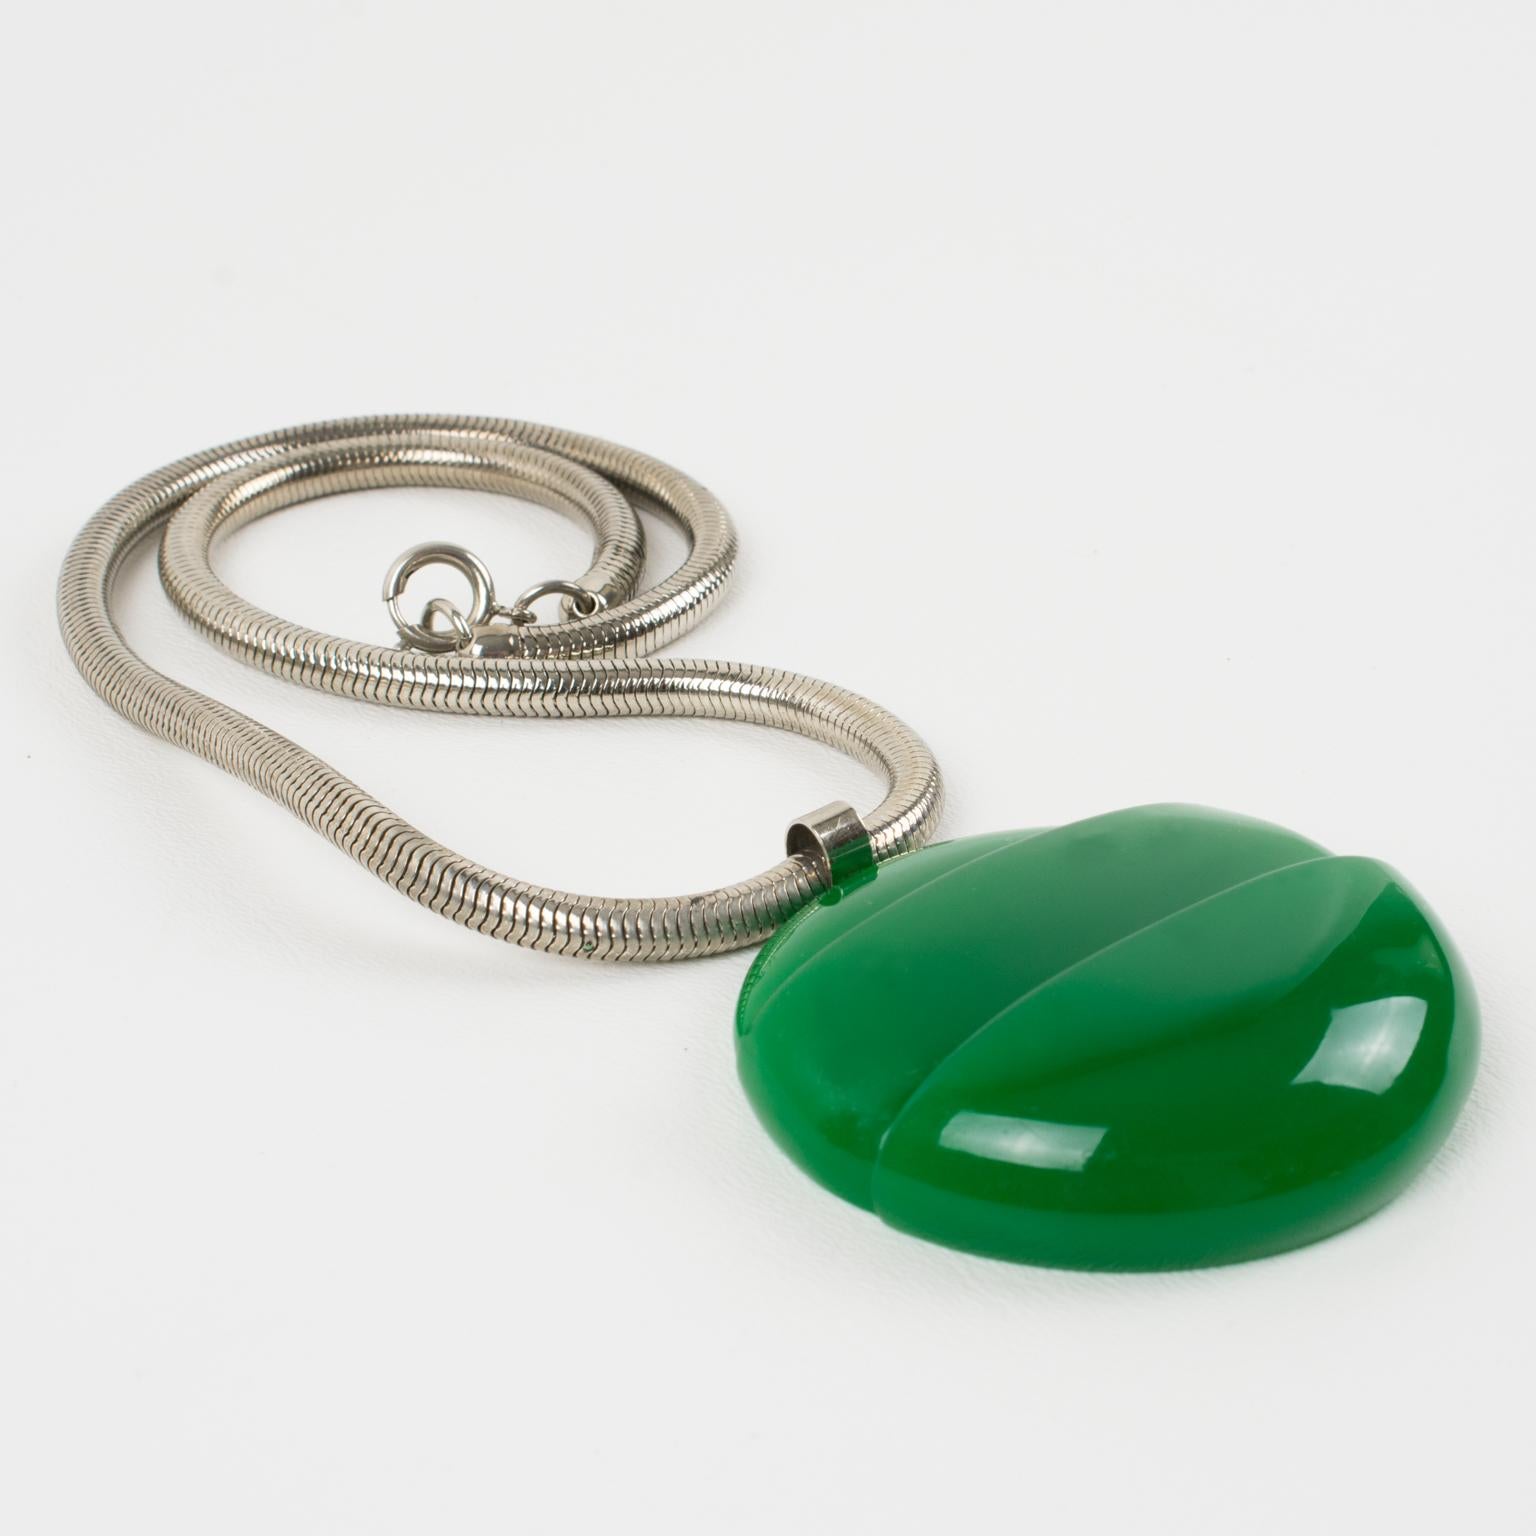 Lanvin Paris Modernist Green Lucite Medallion Necklace with Snake Chain, 1970s For Sale 1